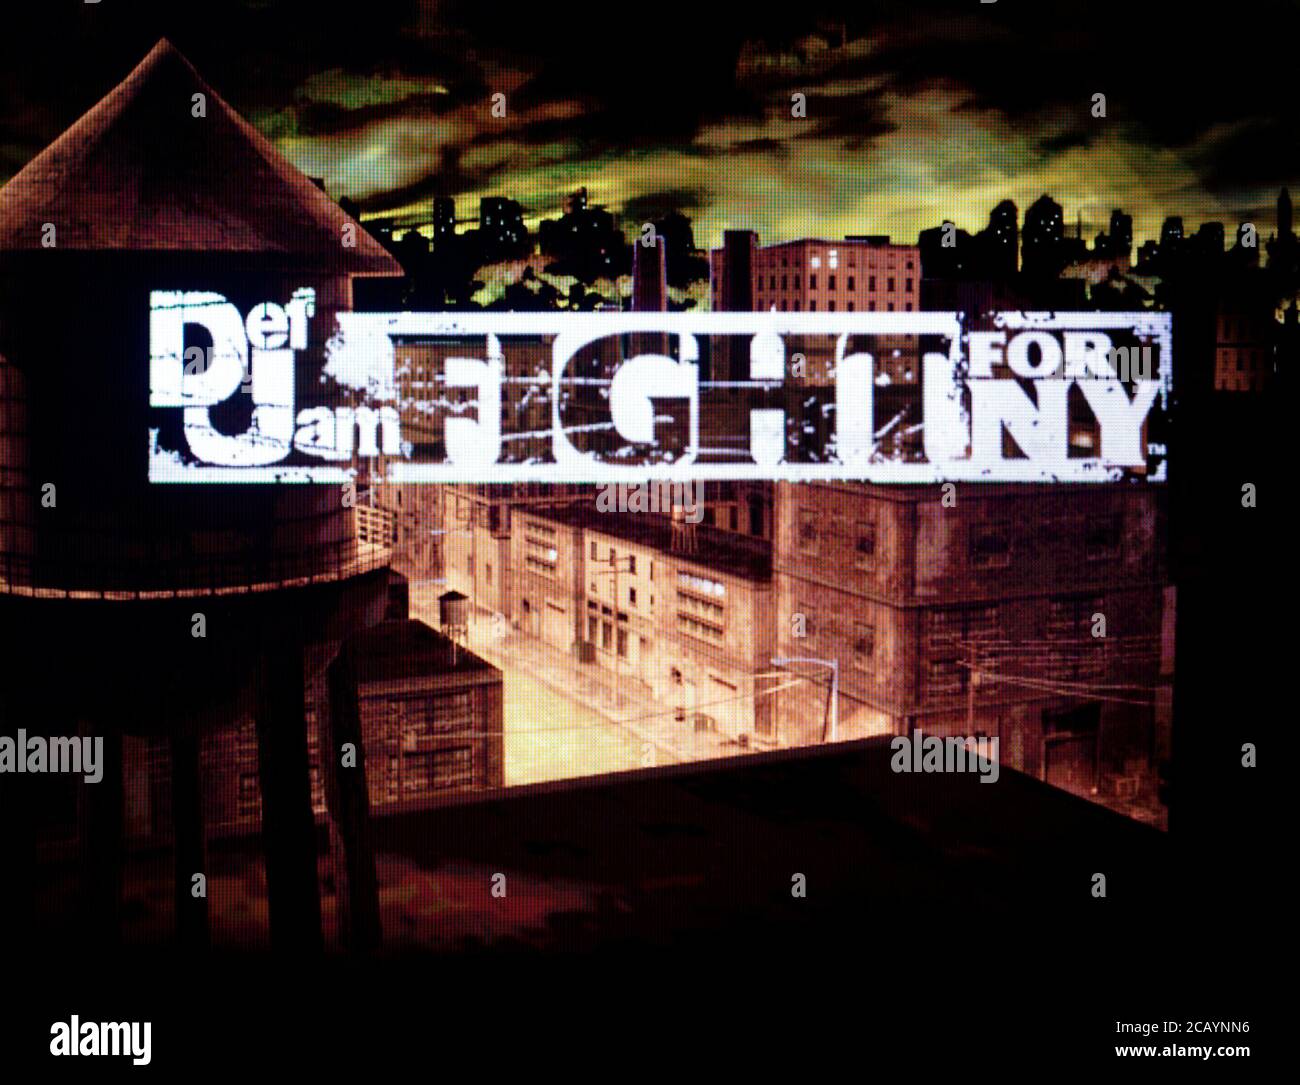 Def Jam Fight For Ny For Iphone - Colaboratory